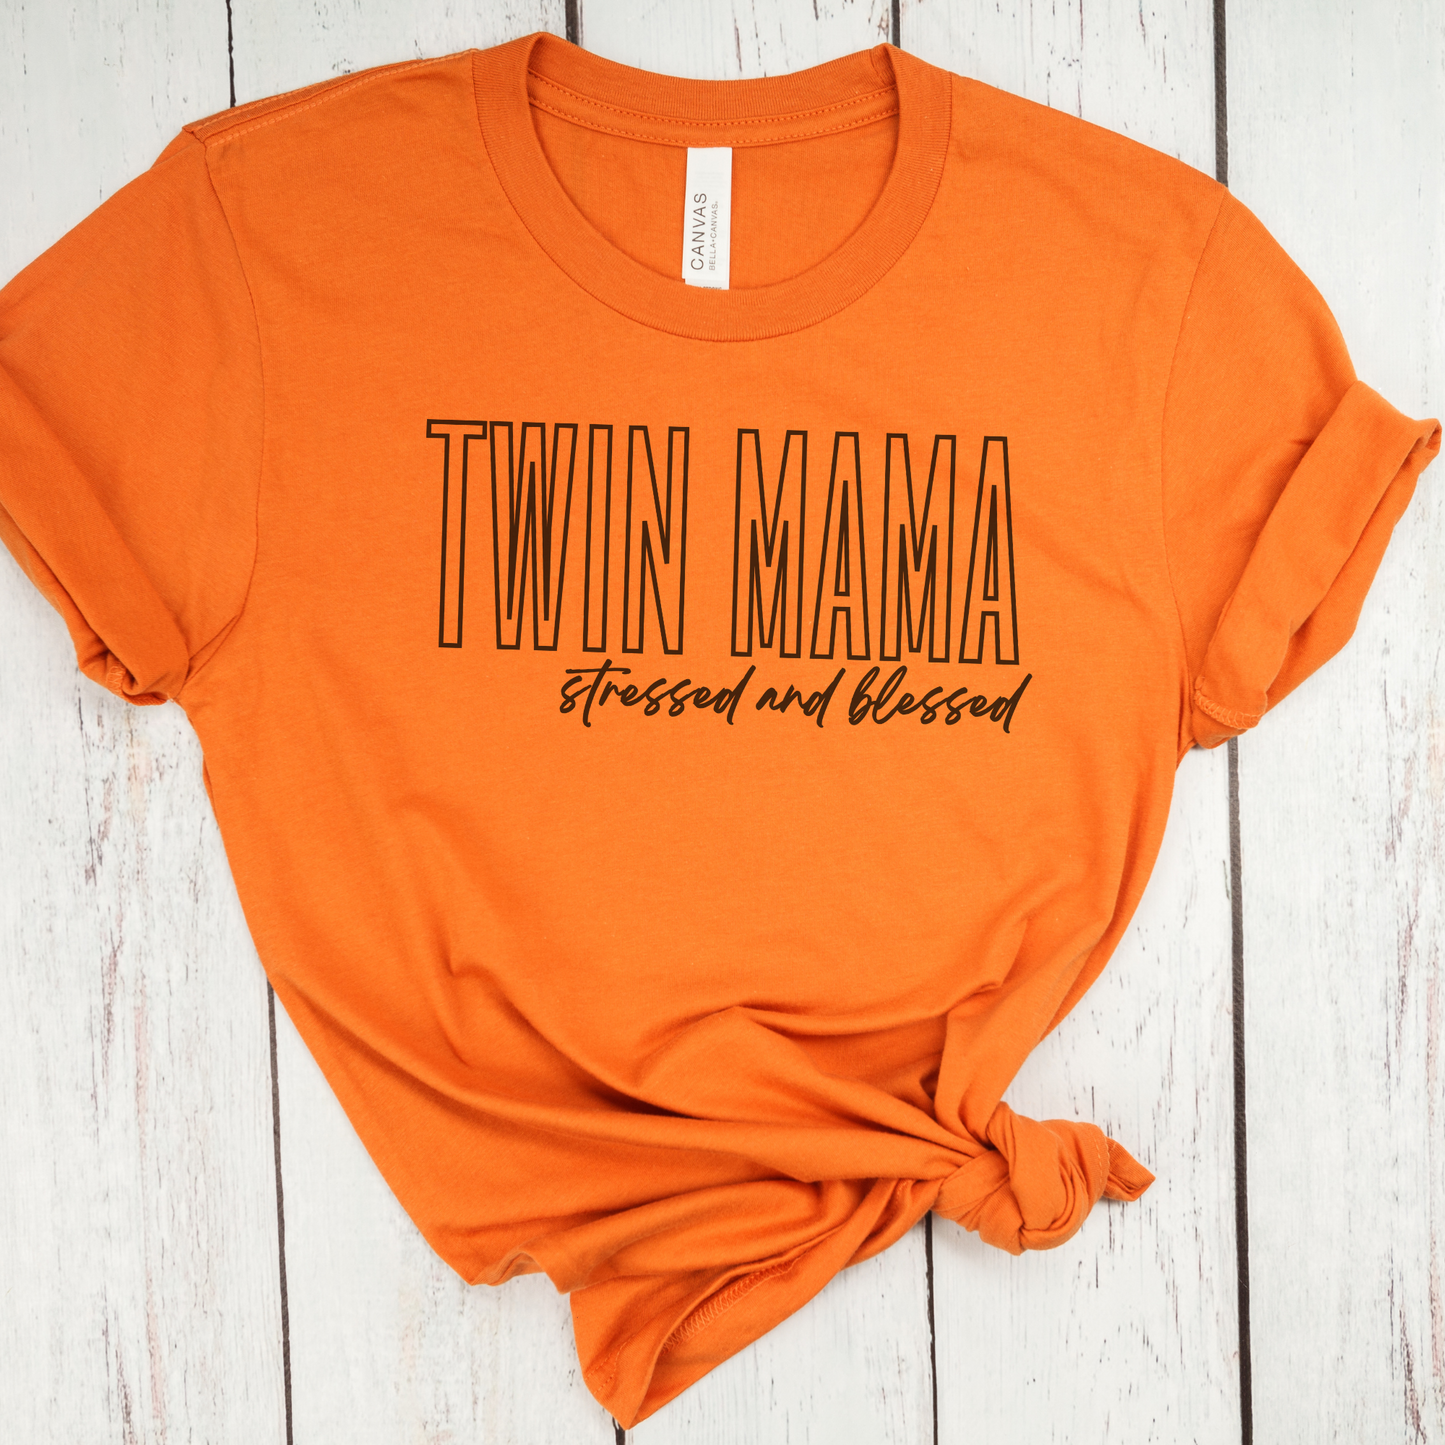 Twin Mama Stressed and Blessed Black Block Hollow Letters Paint Style Script Unisex Jersey Short Sleeve Tee Small-3XL Mother of Multiples